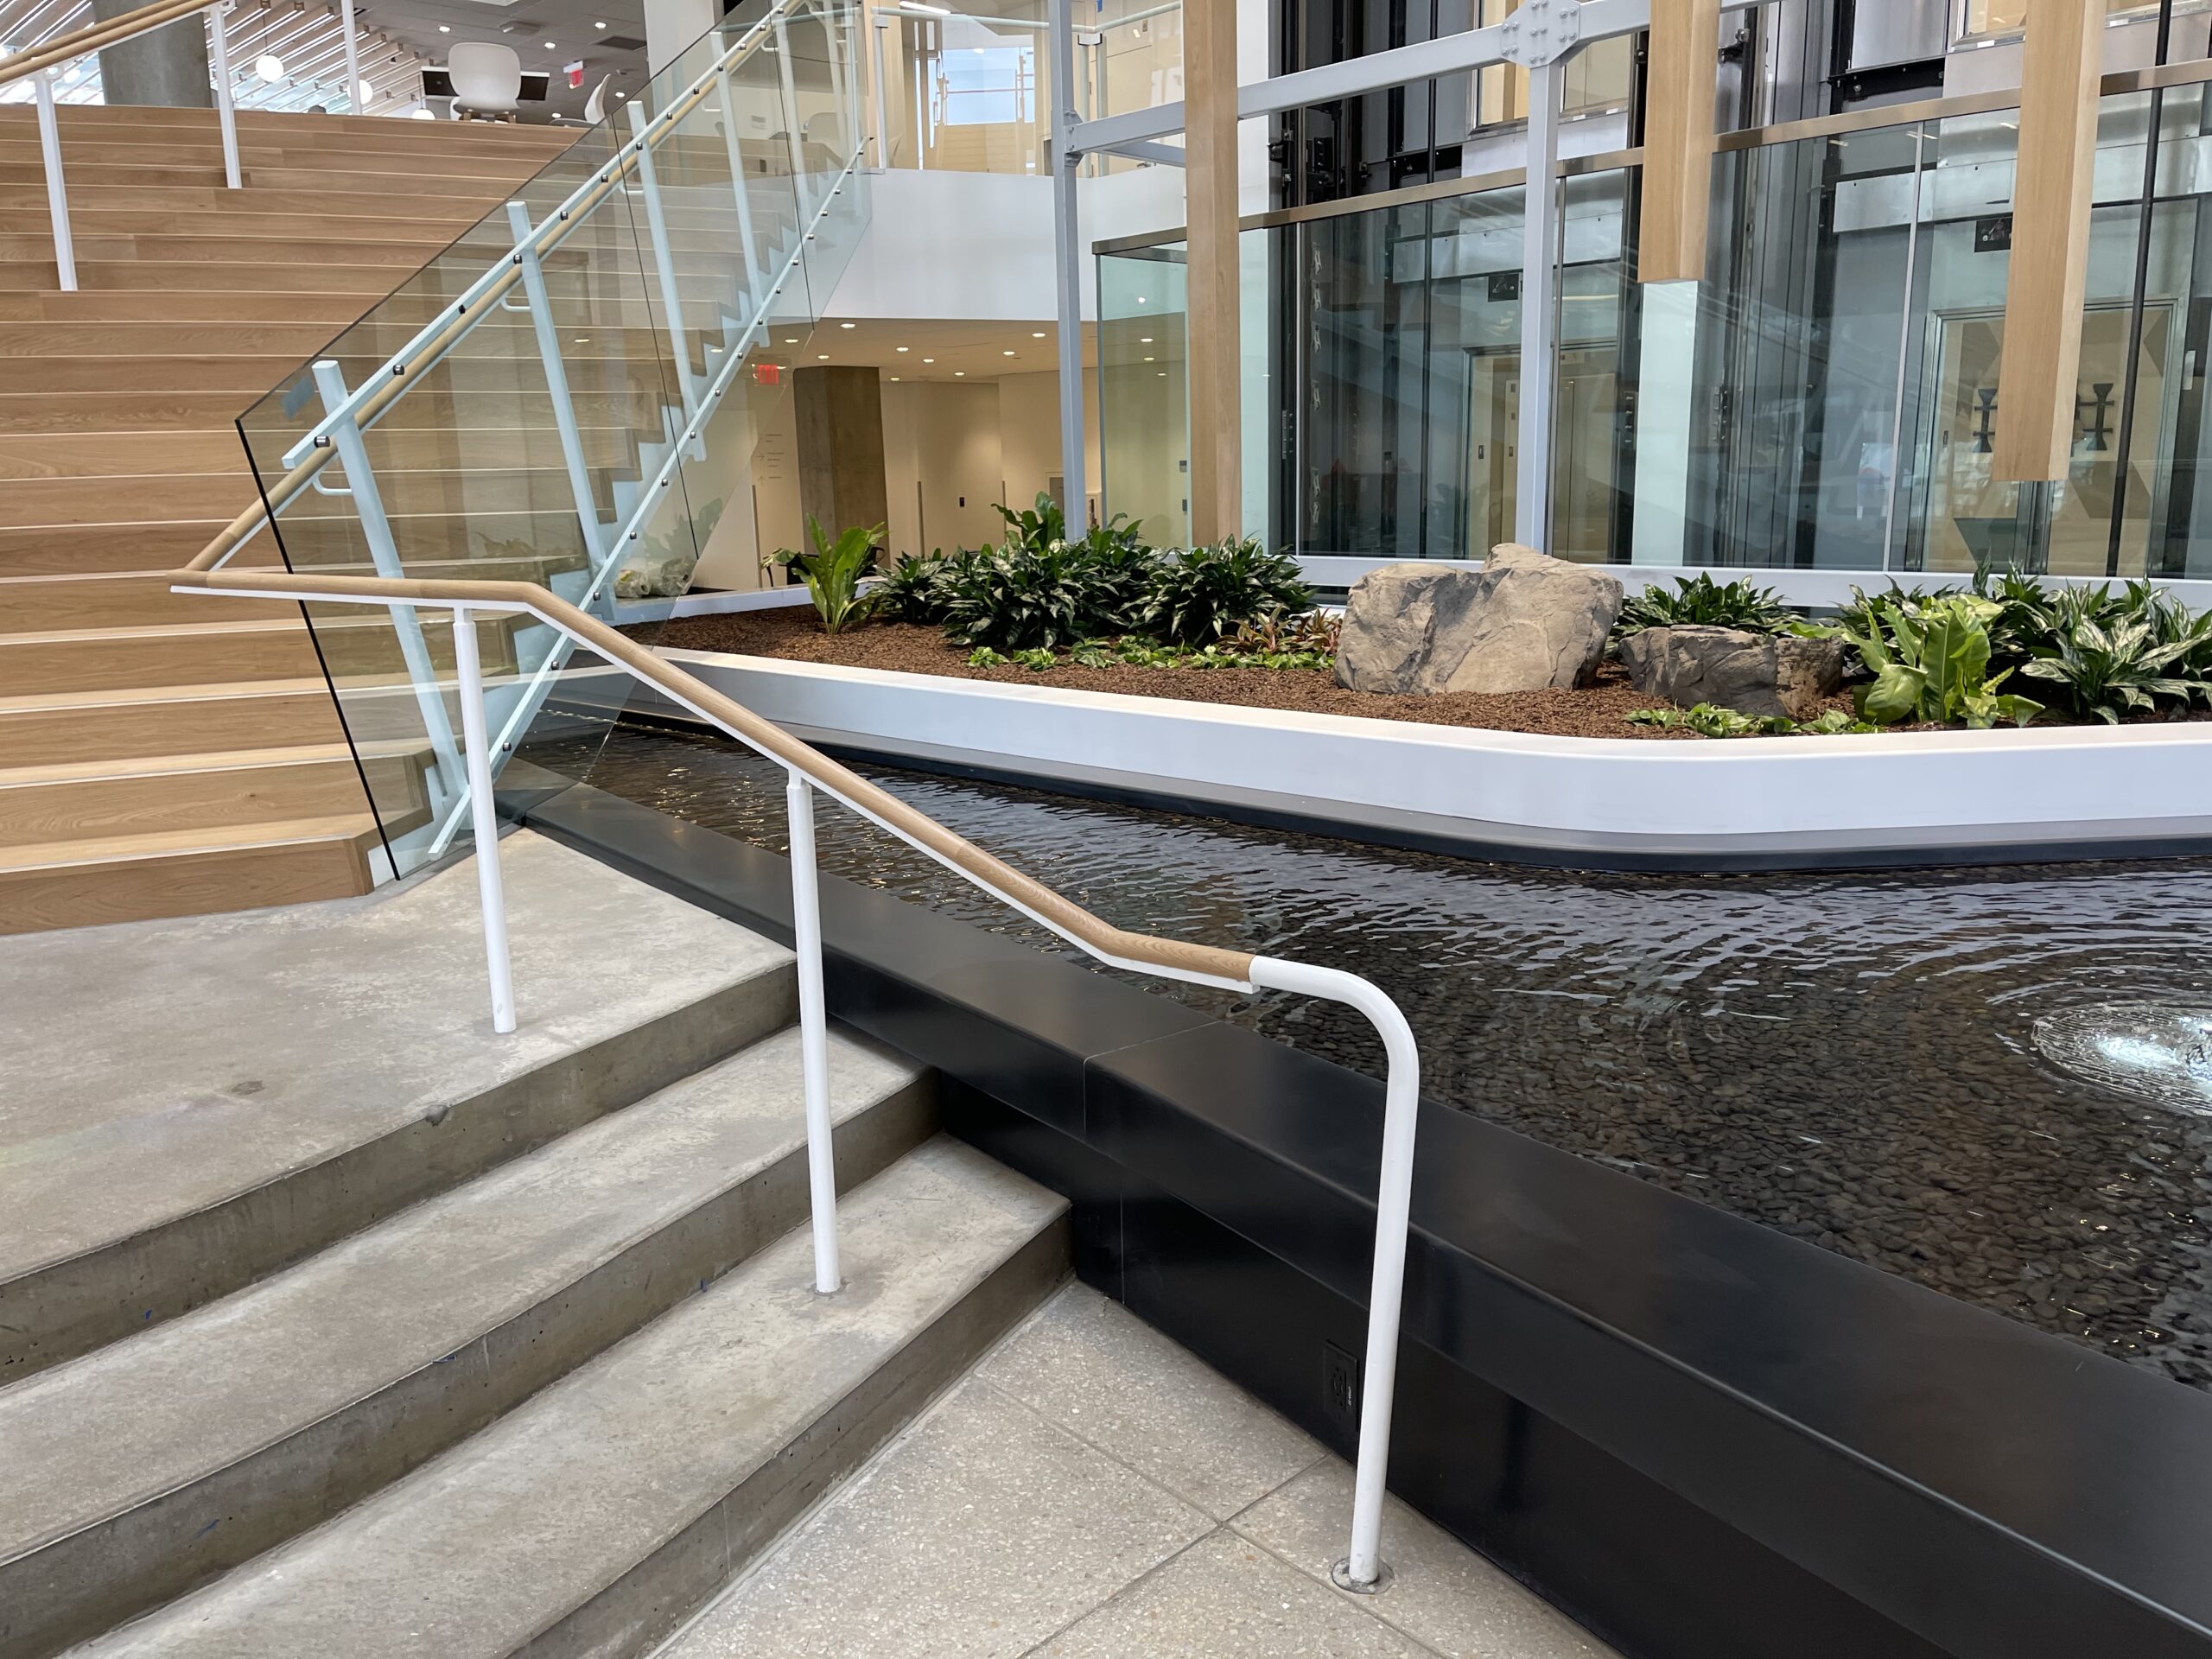 Free-form-stream-water-feature-pool-in-ten-story-atrium-under-stairs-runnel-takeda-cambridge-ma-by-water-structures